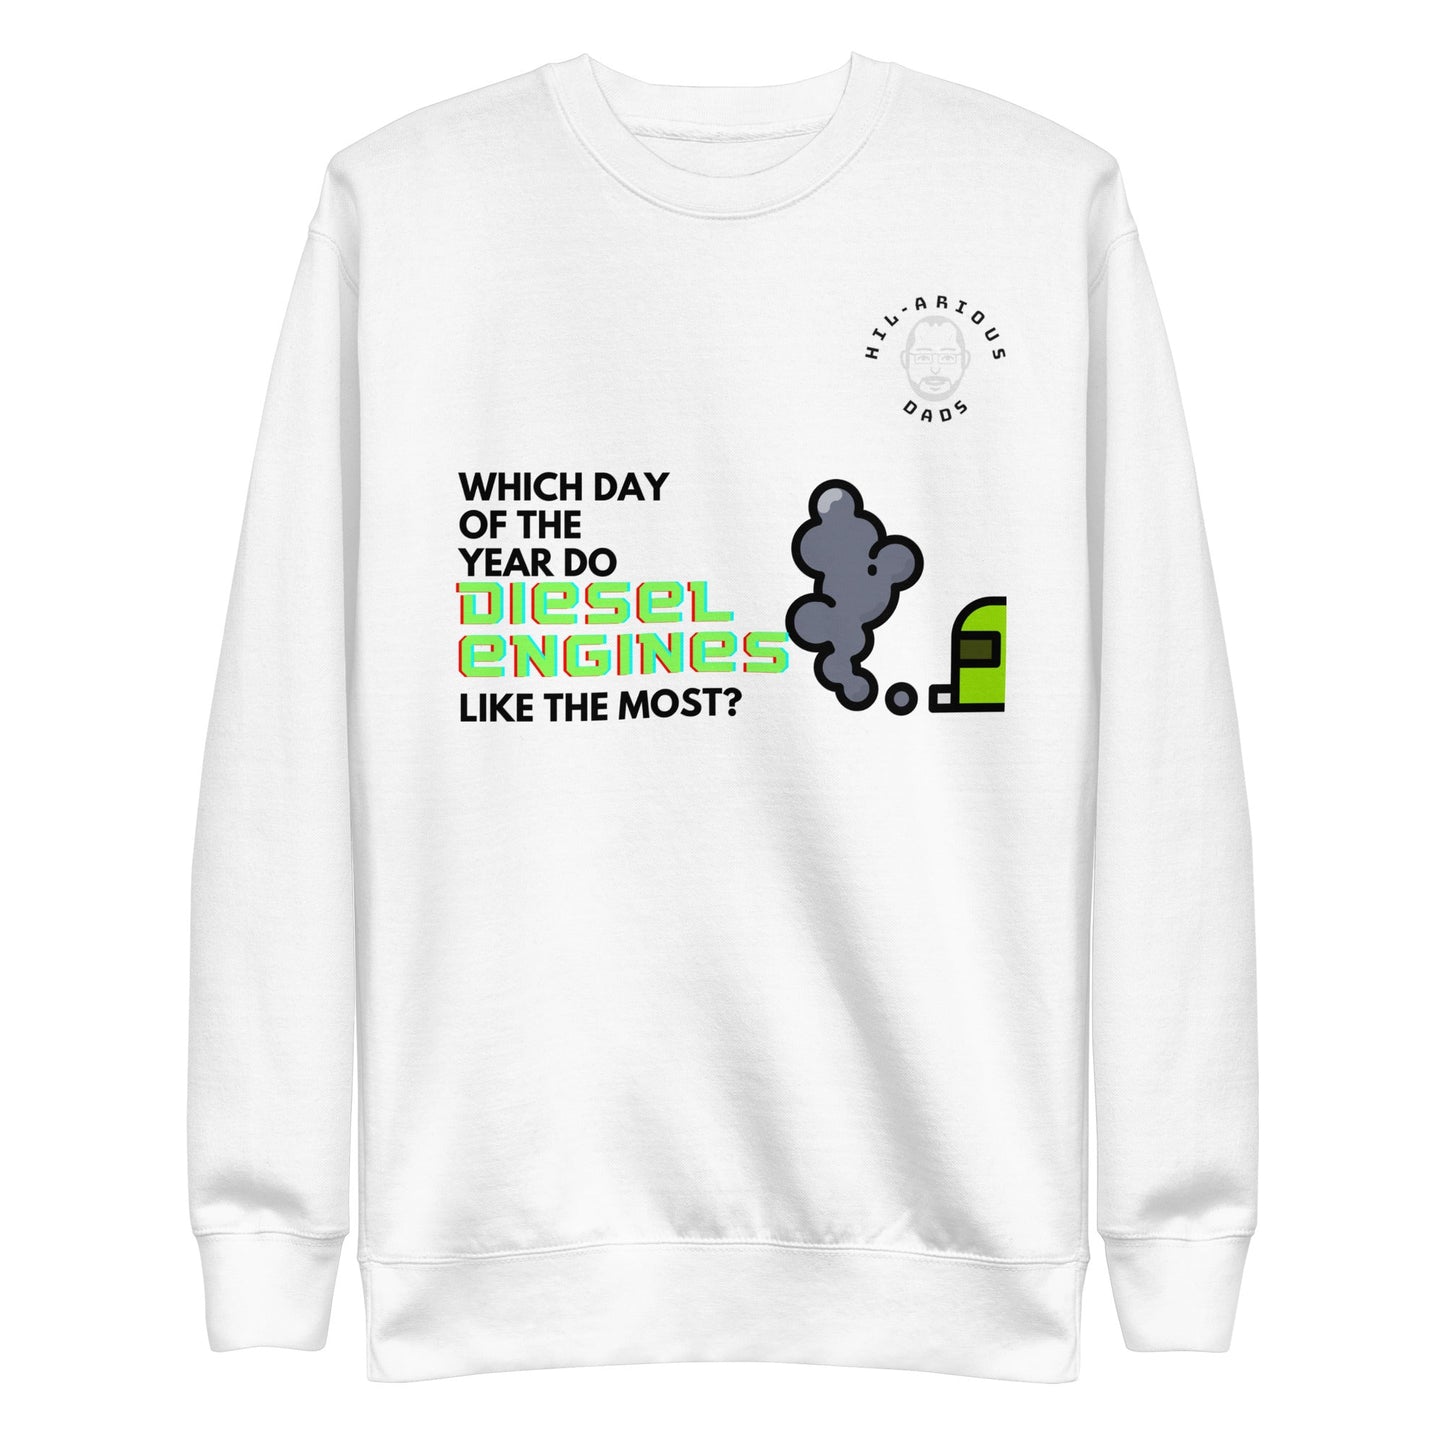 Which day of the year do diesel engines like the most?-Sweatshirt - Hil-arious Dads